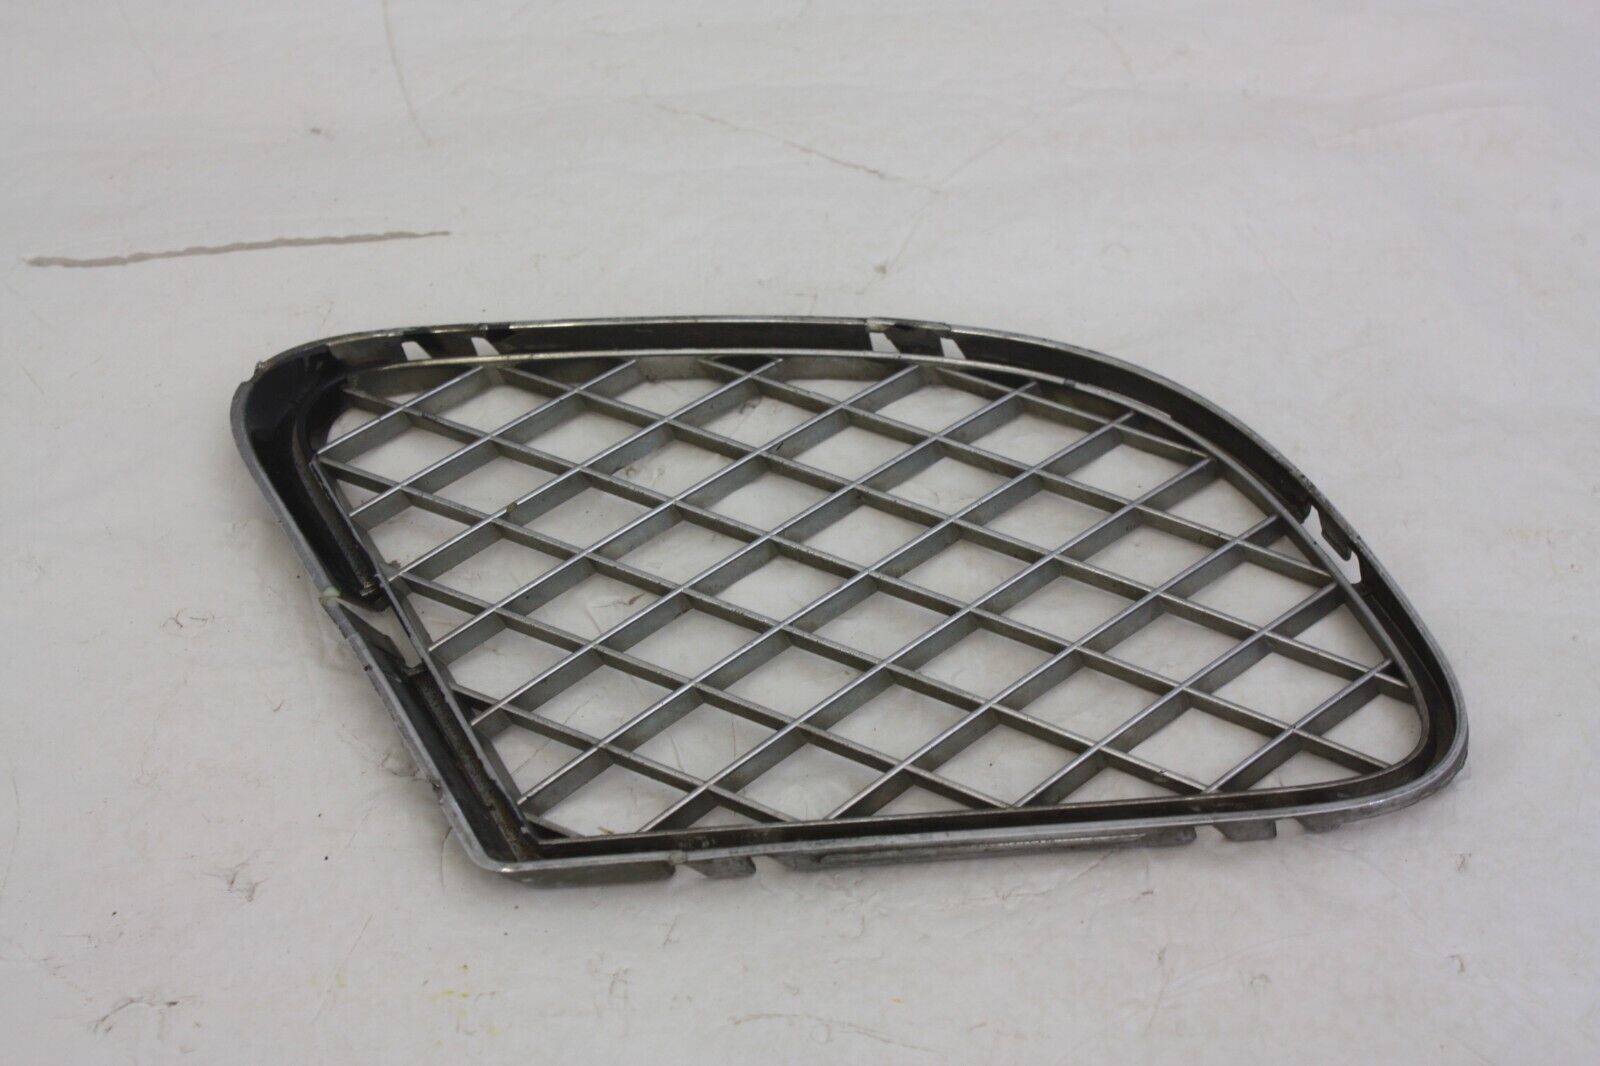 Bentley-Continental-GT-GTC-Front-Bumper-Right-Grill-2008-2011-3W8807682D-Genuine-176270606618